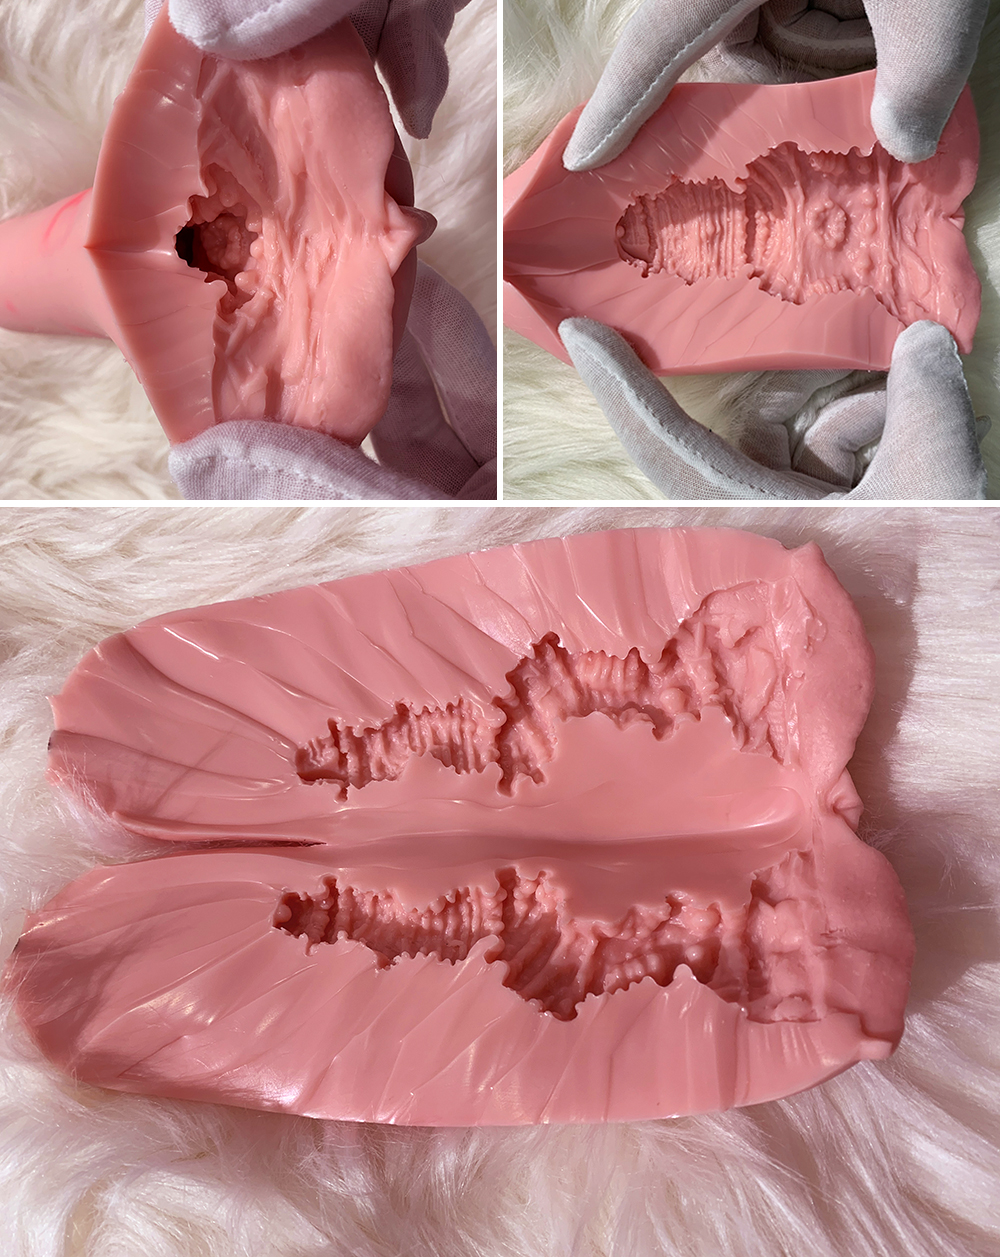 Gynoid Doll RZR|Realistic Silicone Sex Doll|Vagina cavity|Inside structure of vagina cavity|M12:11cm